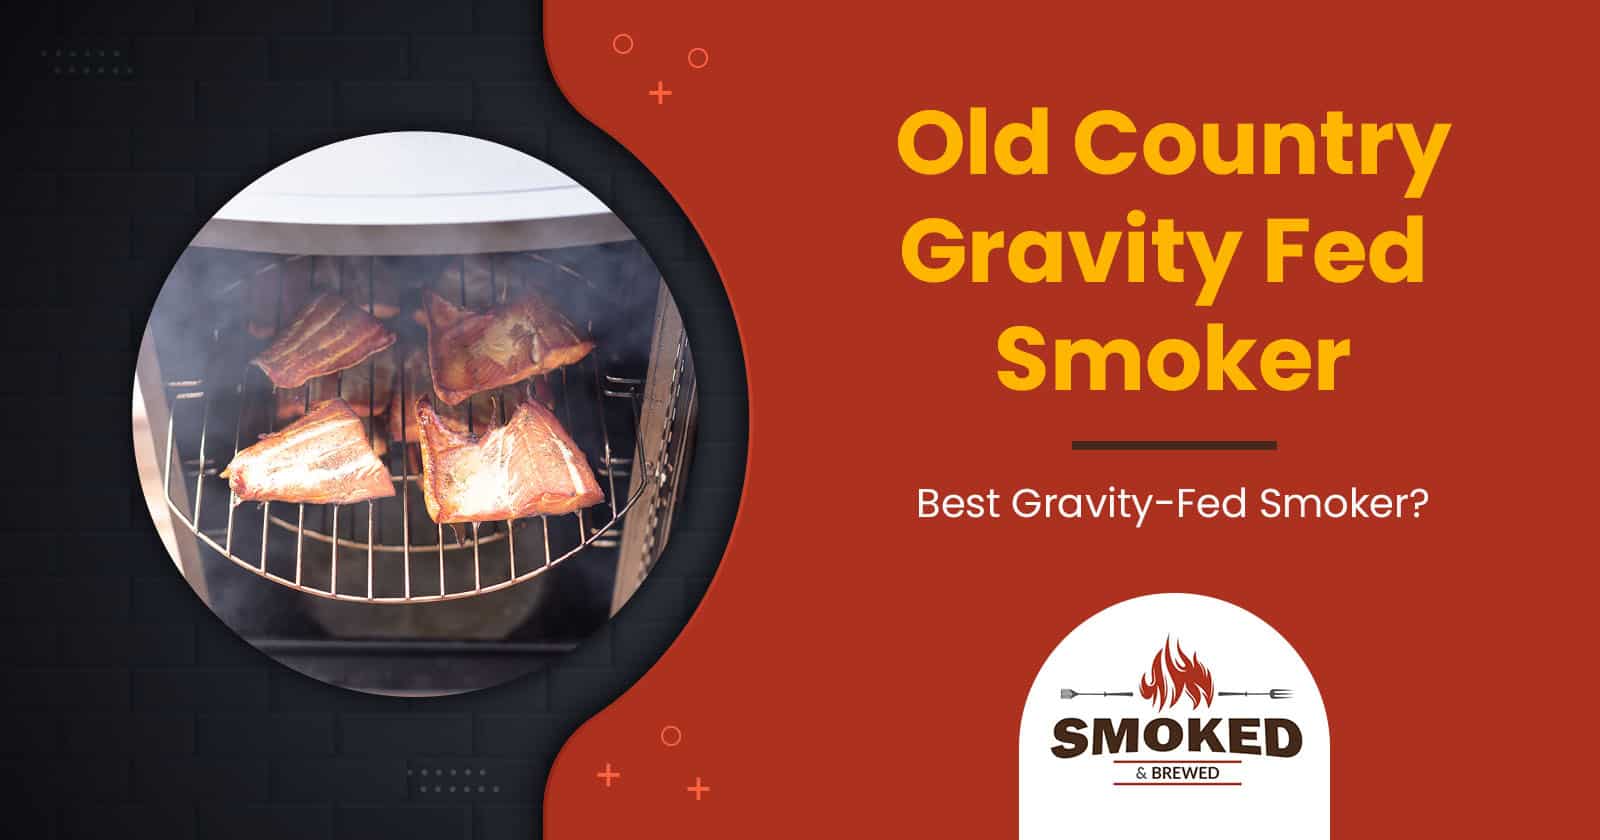 Old Country Gravity Fed Smoker – Best Gravity-Fed Smoker?